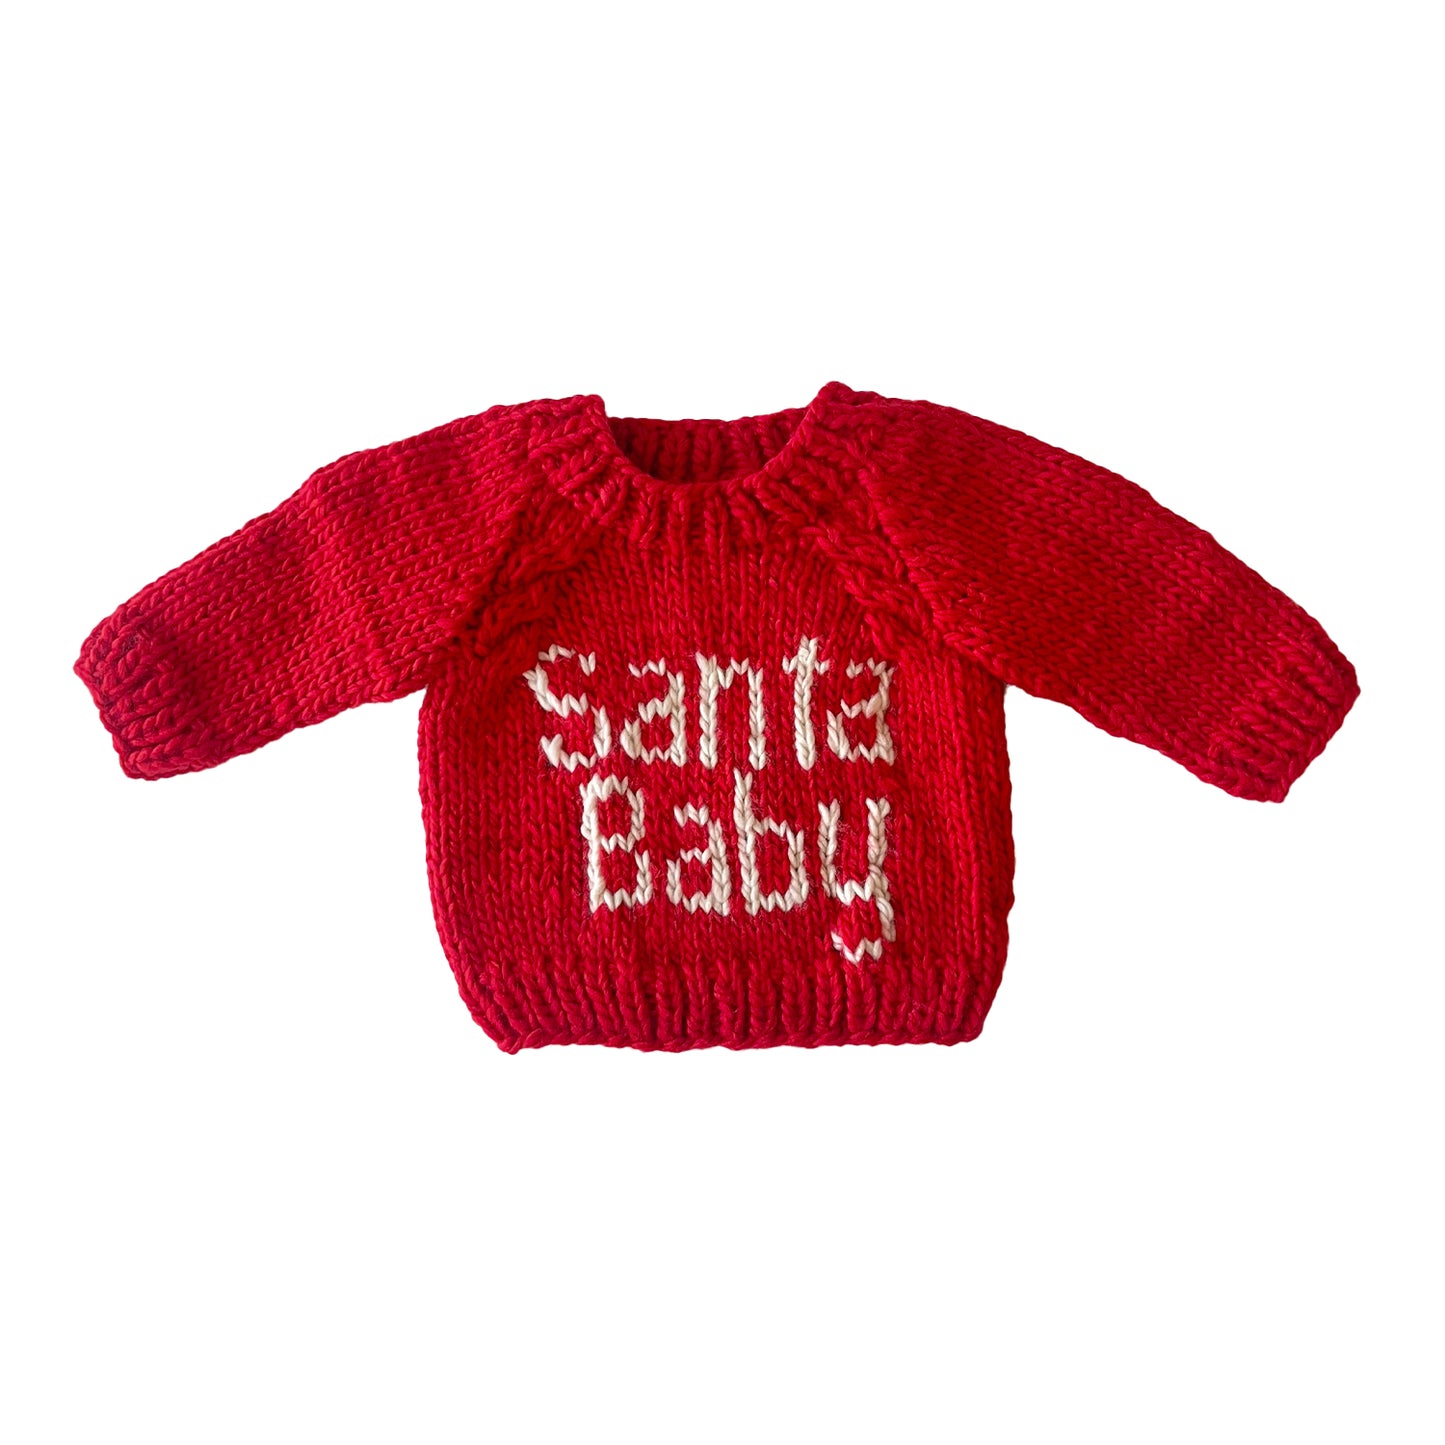 Santa Baby Crew Neck Knit Sweater, Red